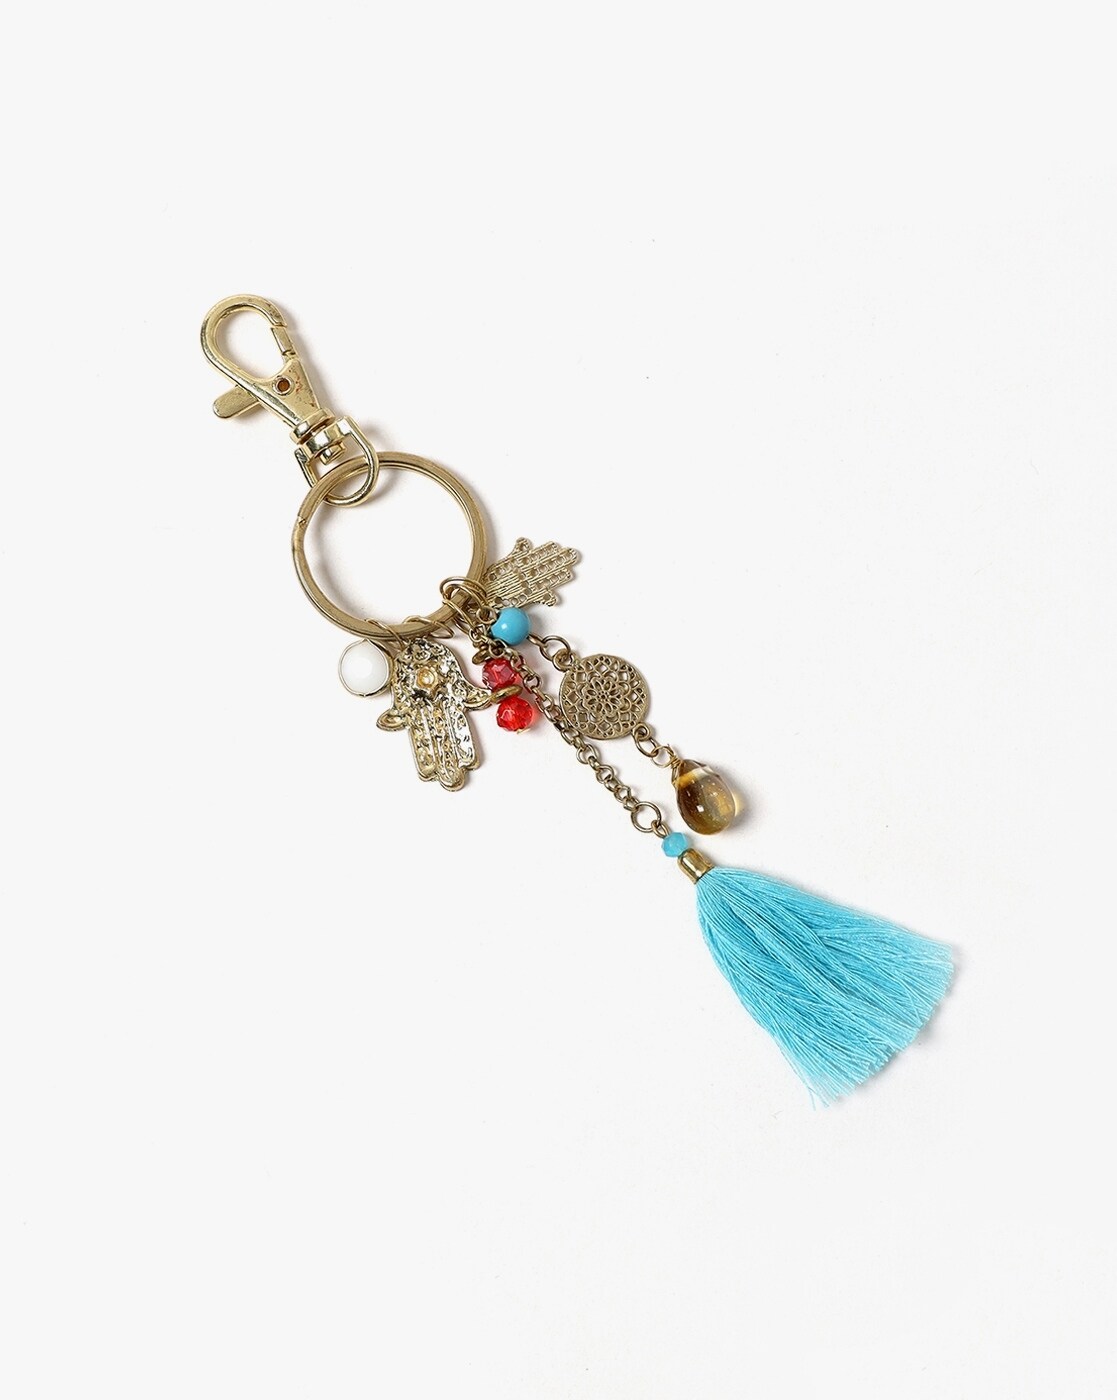 Shop Charms For Bag online